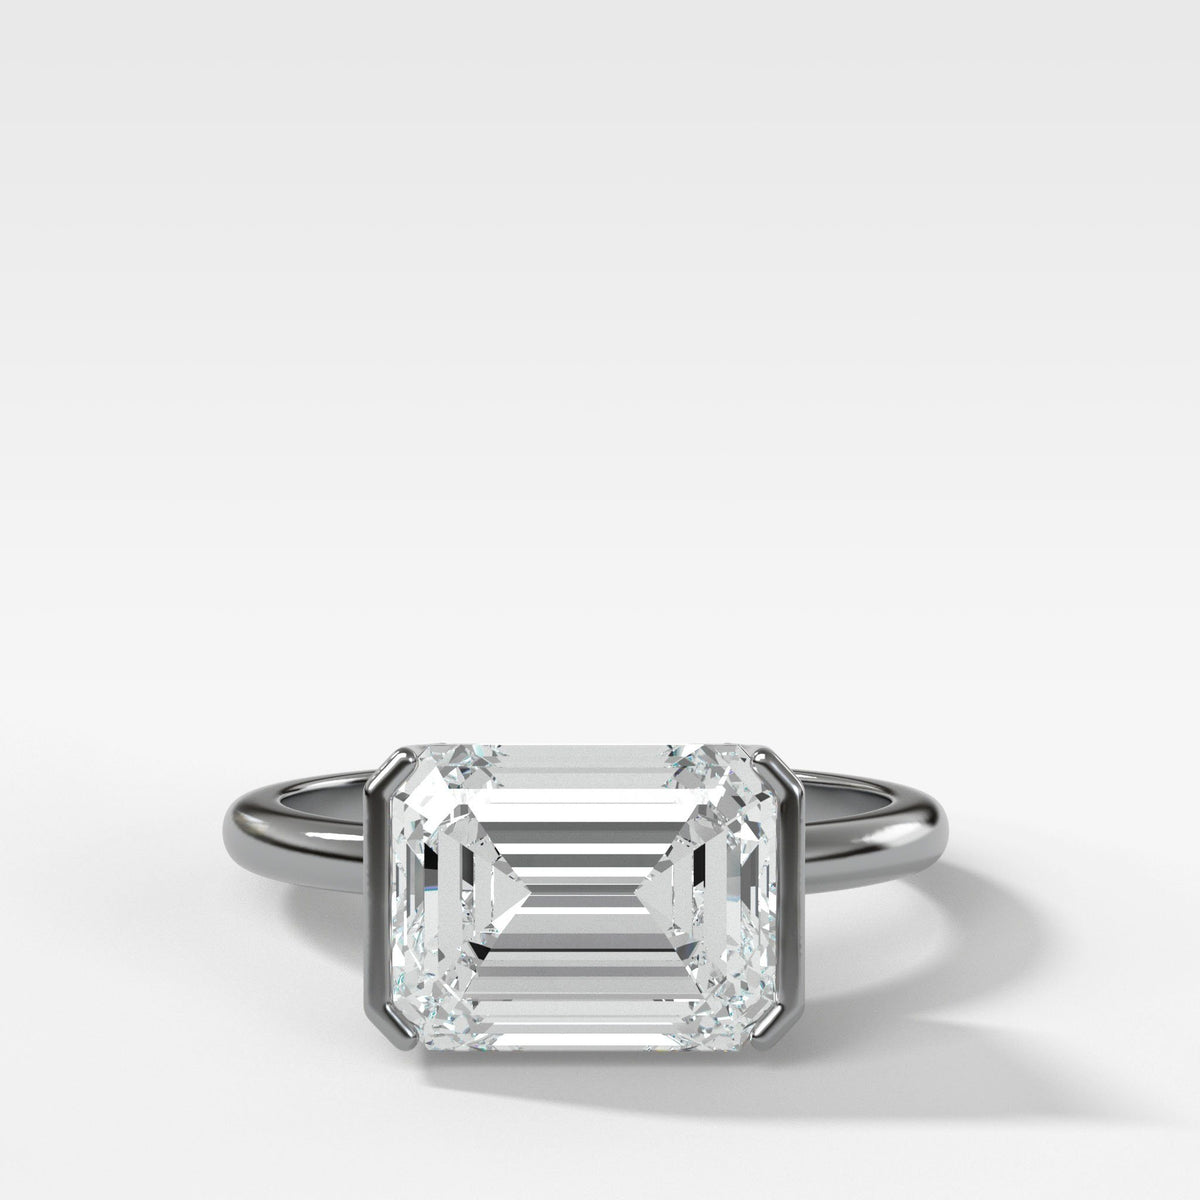 East West Half Bezel Solitaire Engagement Ring With Emerald Cut by Good Stone in White Gold